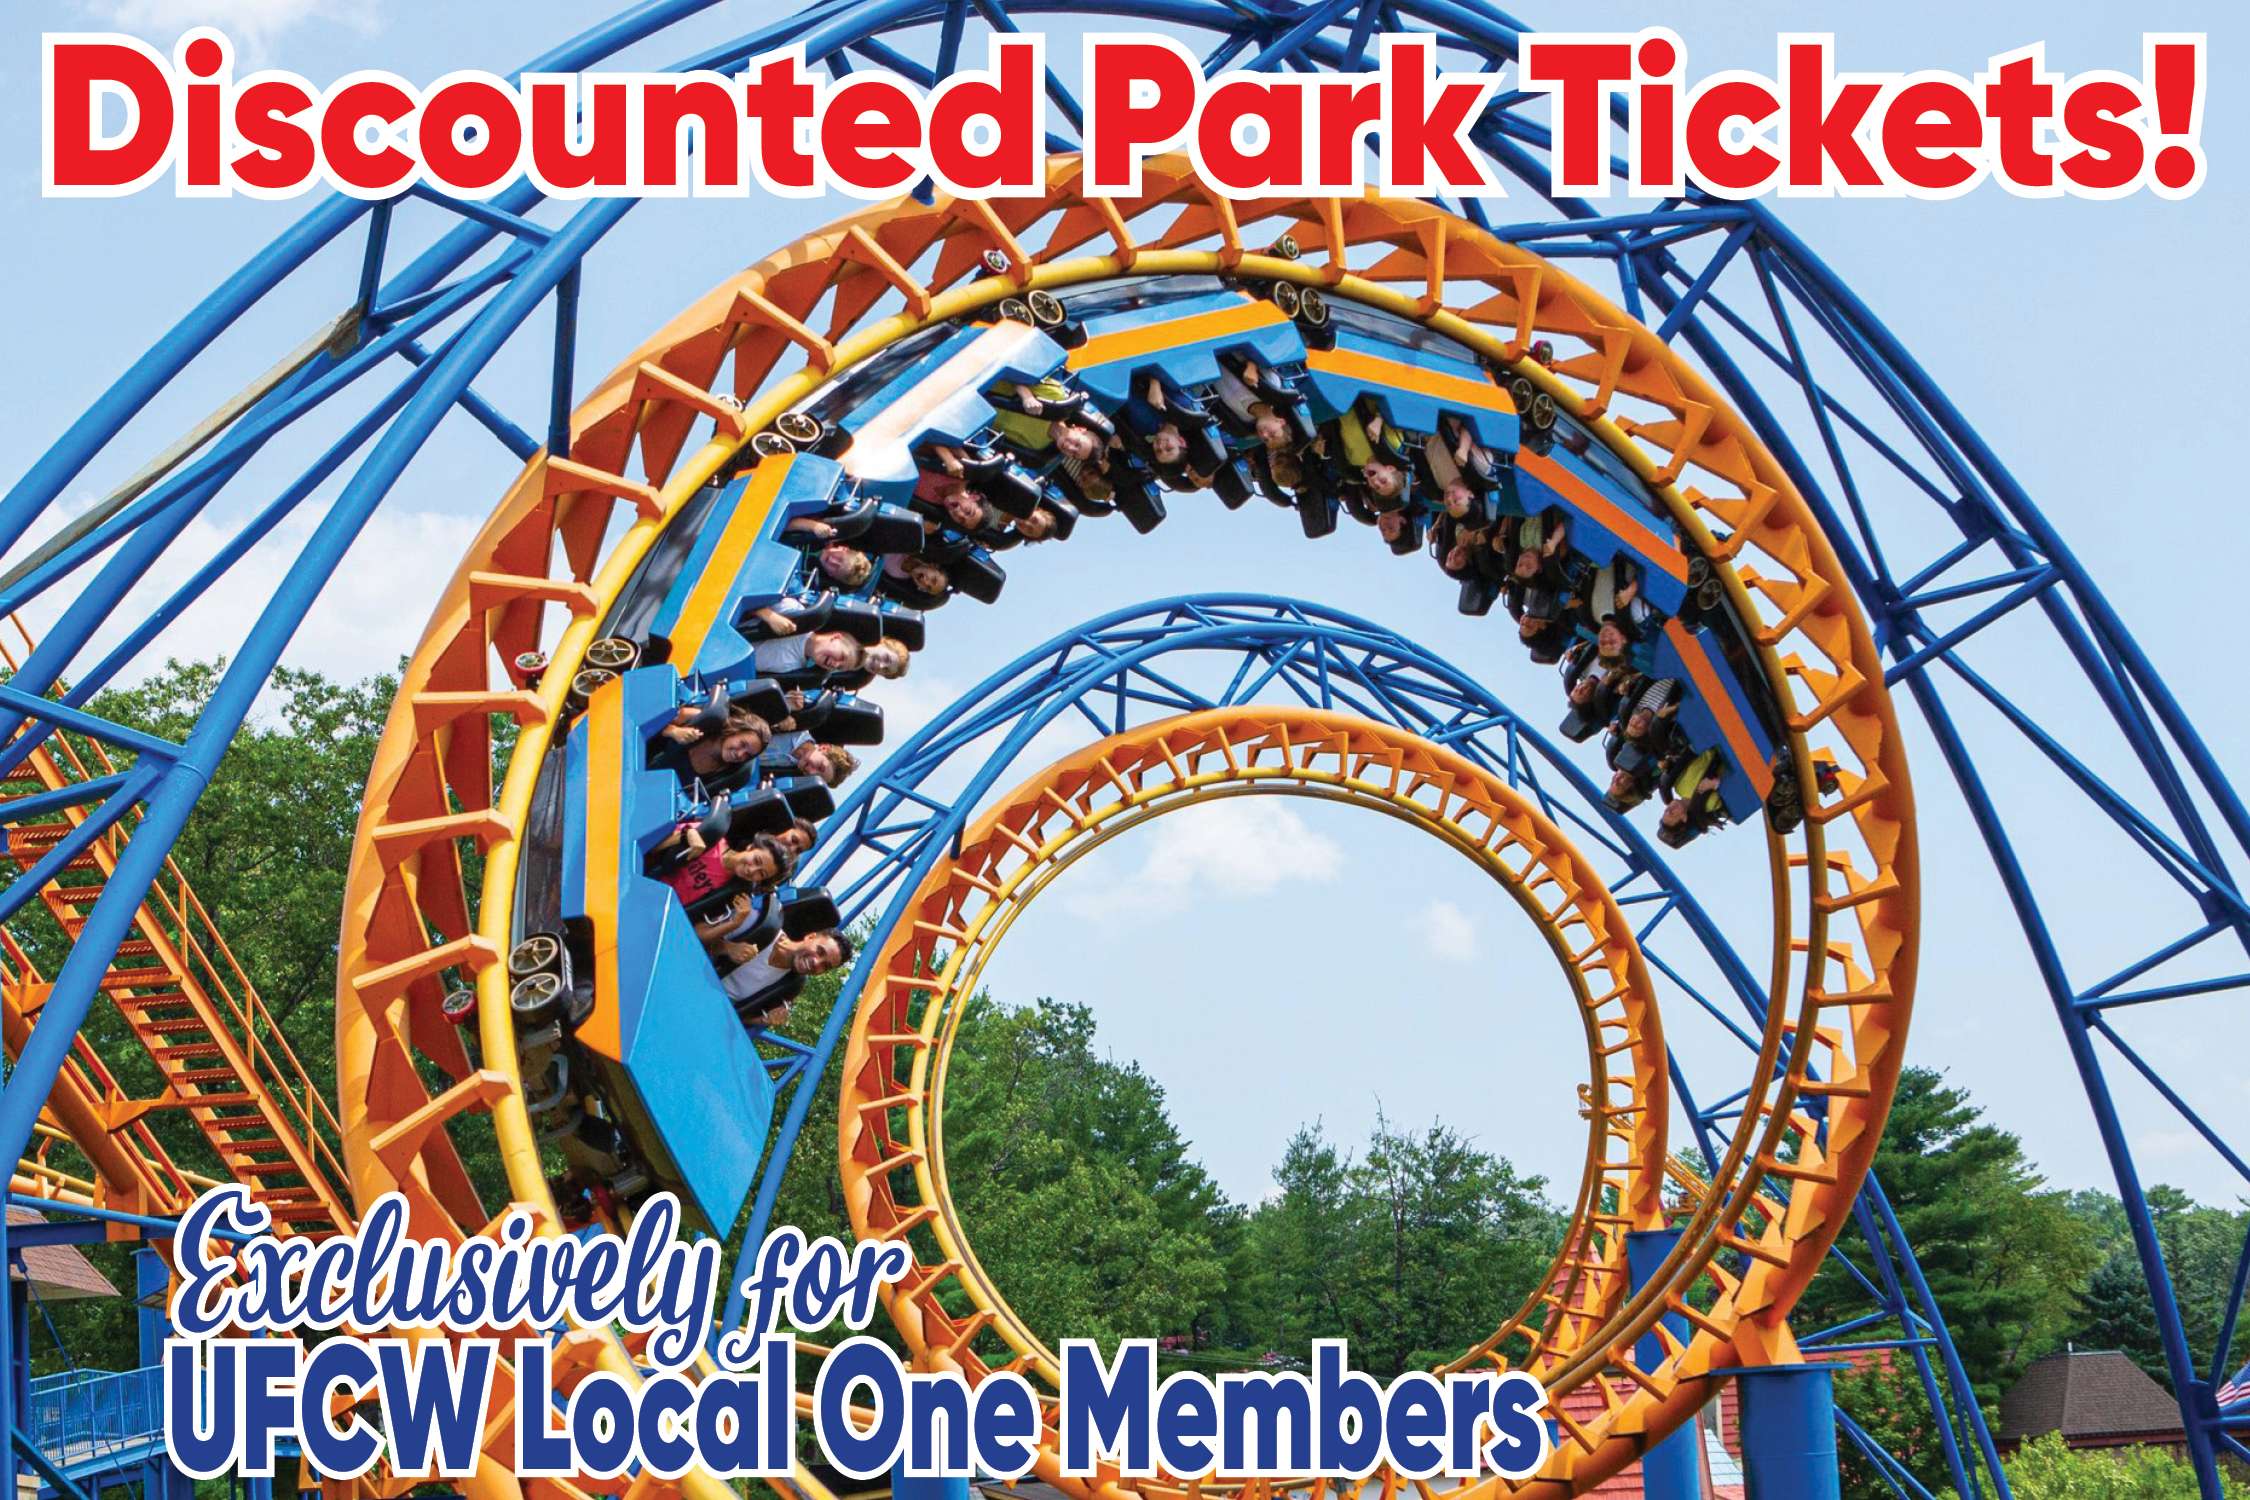 Discounted Park Tockets